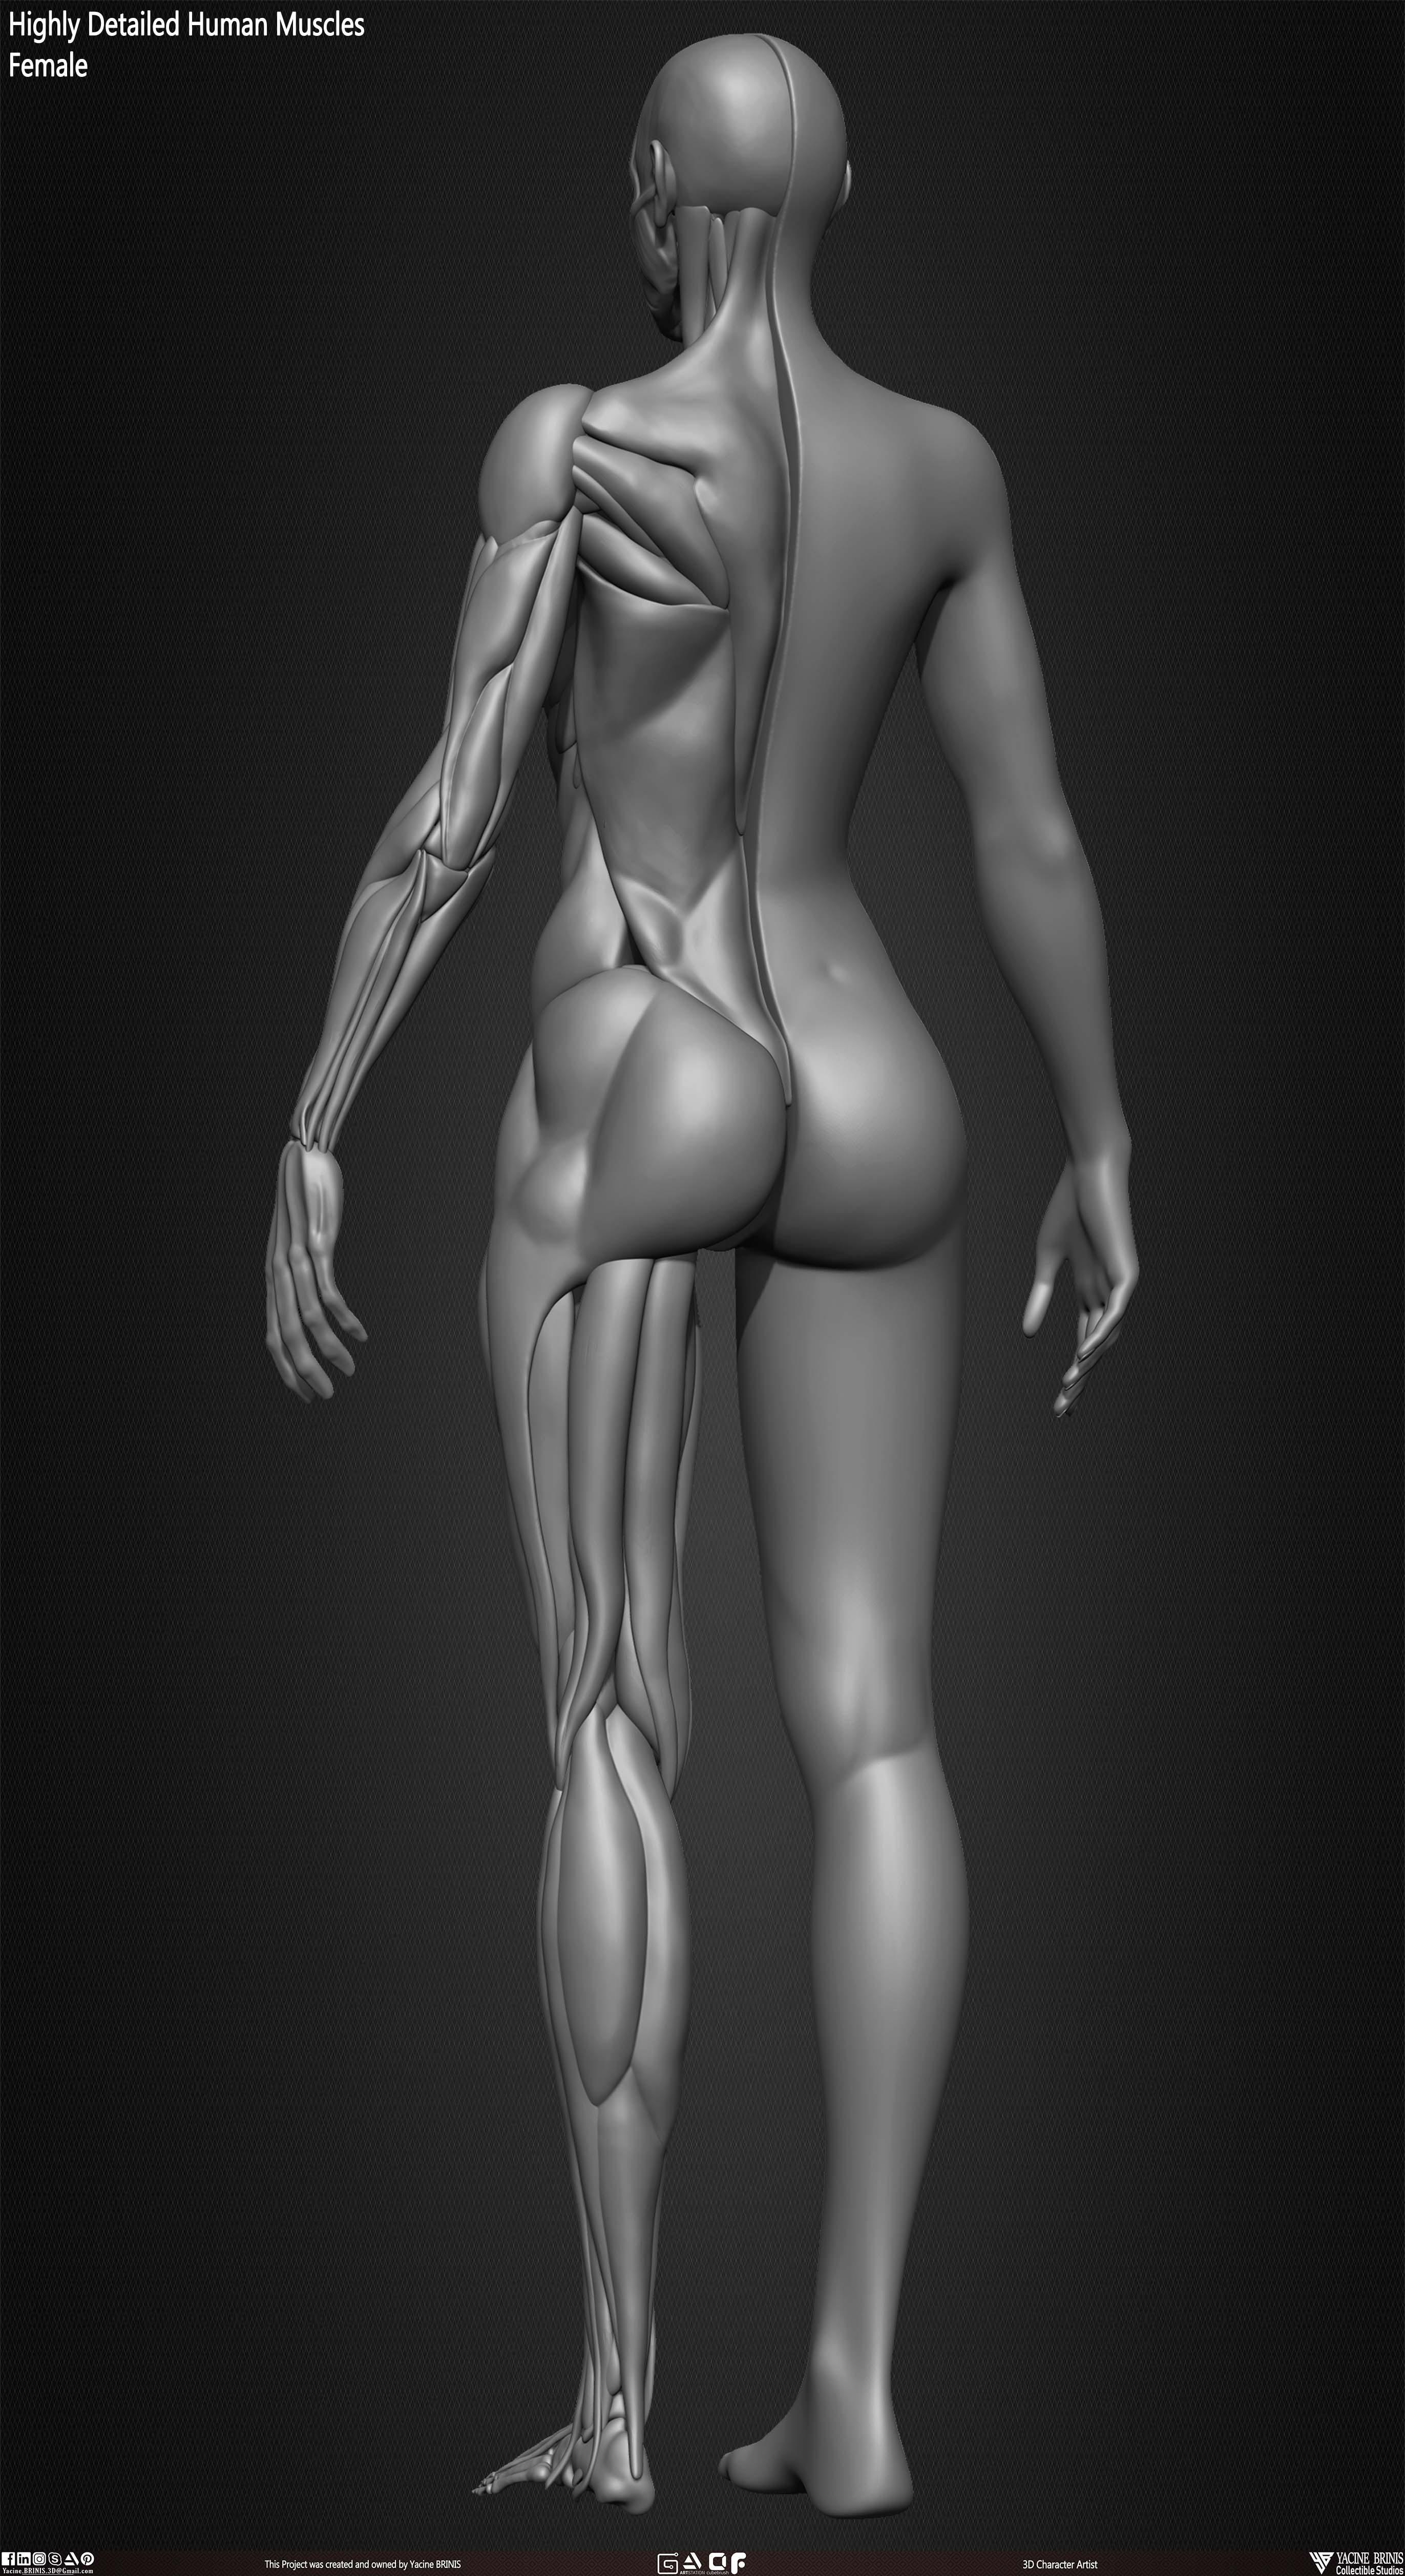 Female Human Muscles 3D Model sculpted by Yacine BRINIS 009